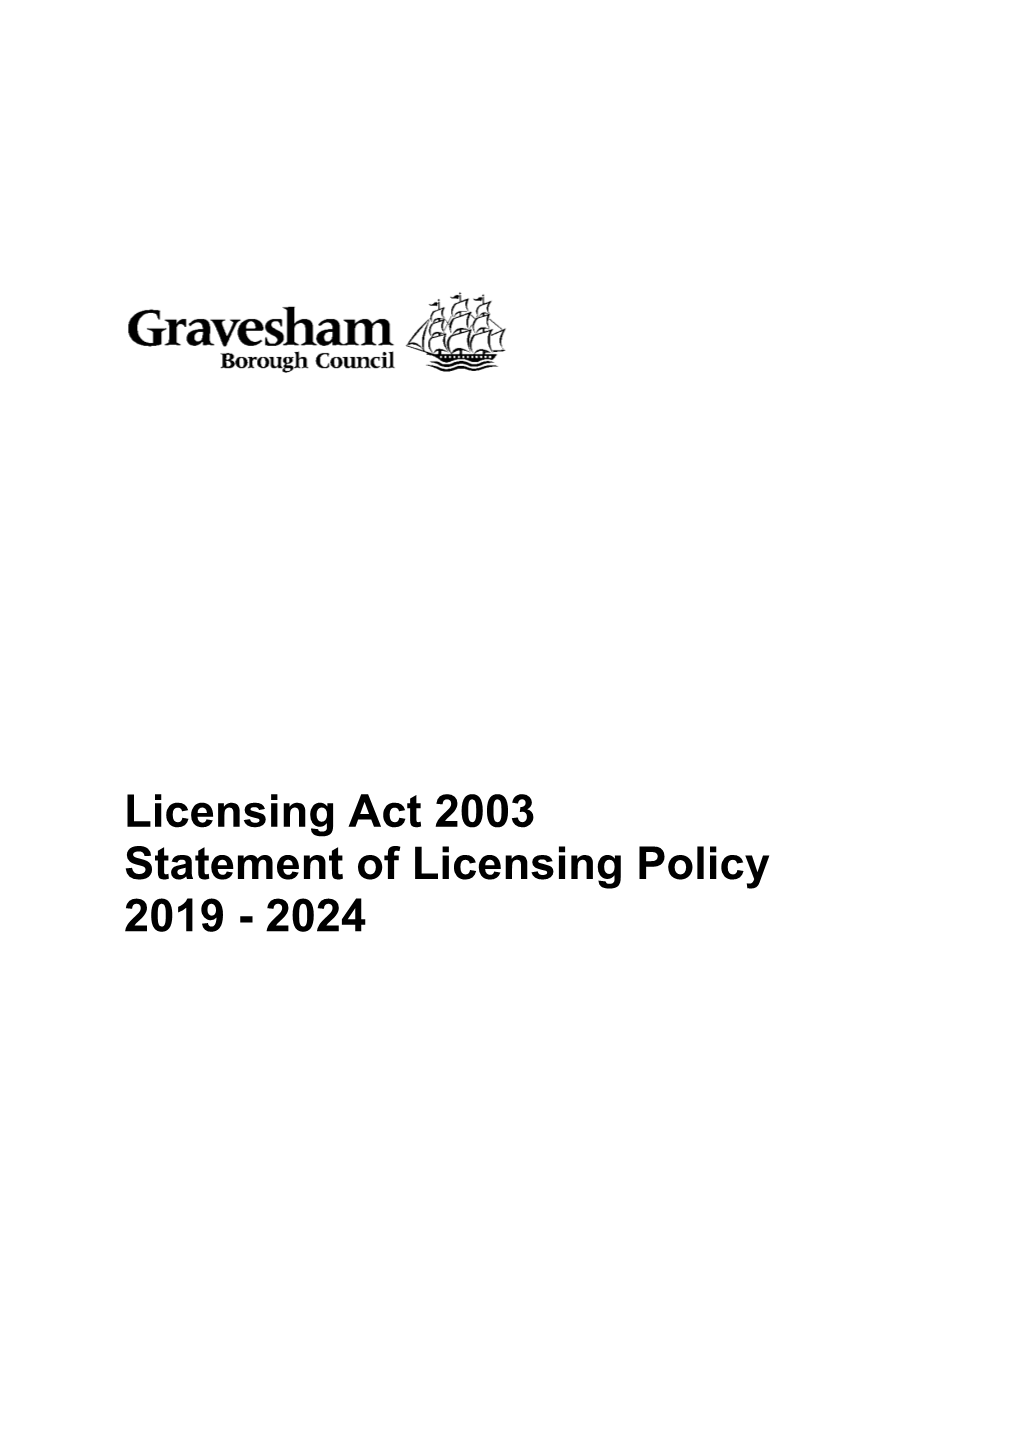 Licensing Act 2003 Statement of Licensing Policy 2019 - 2024